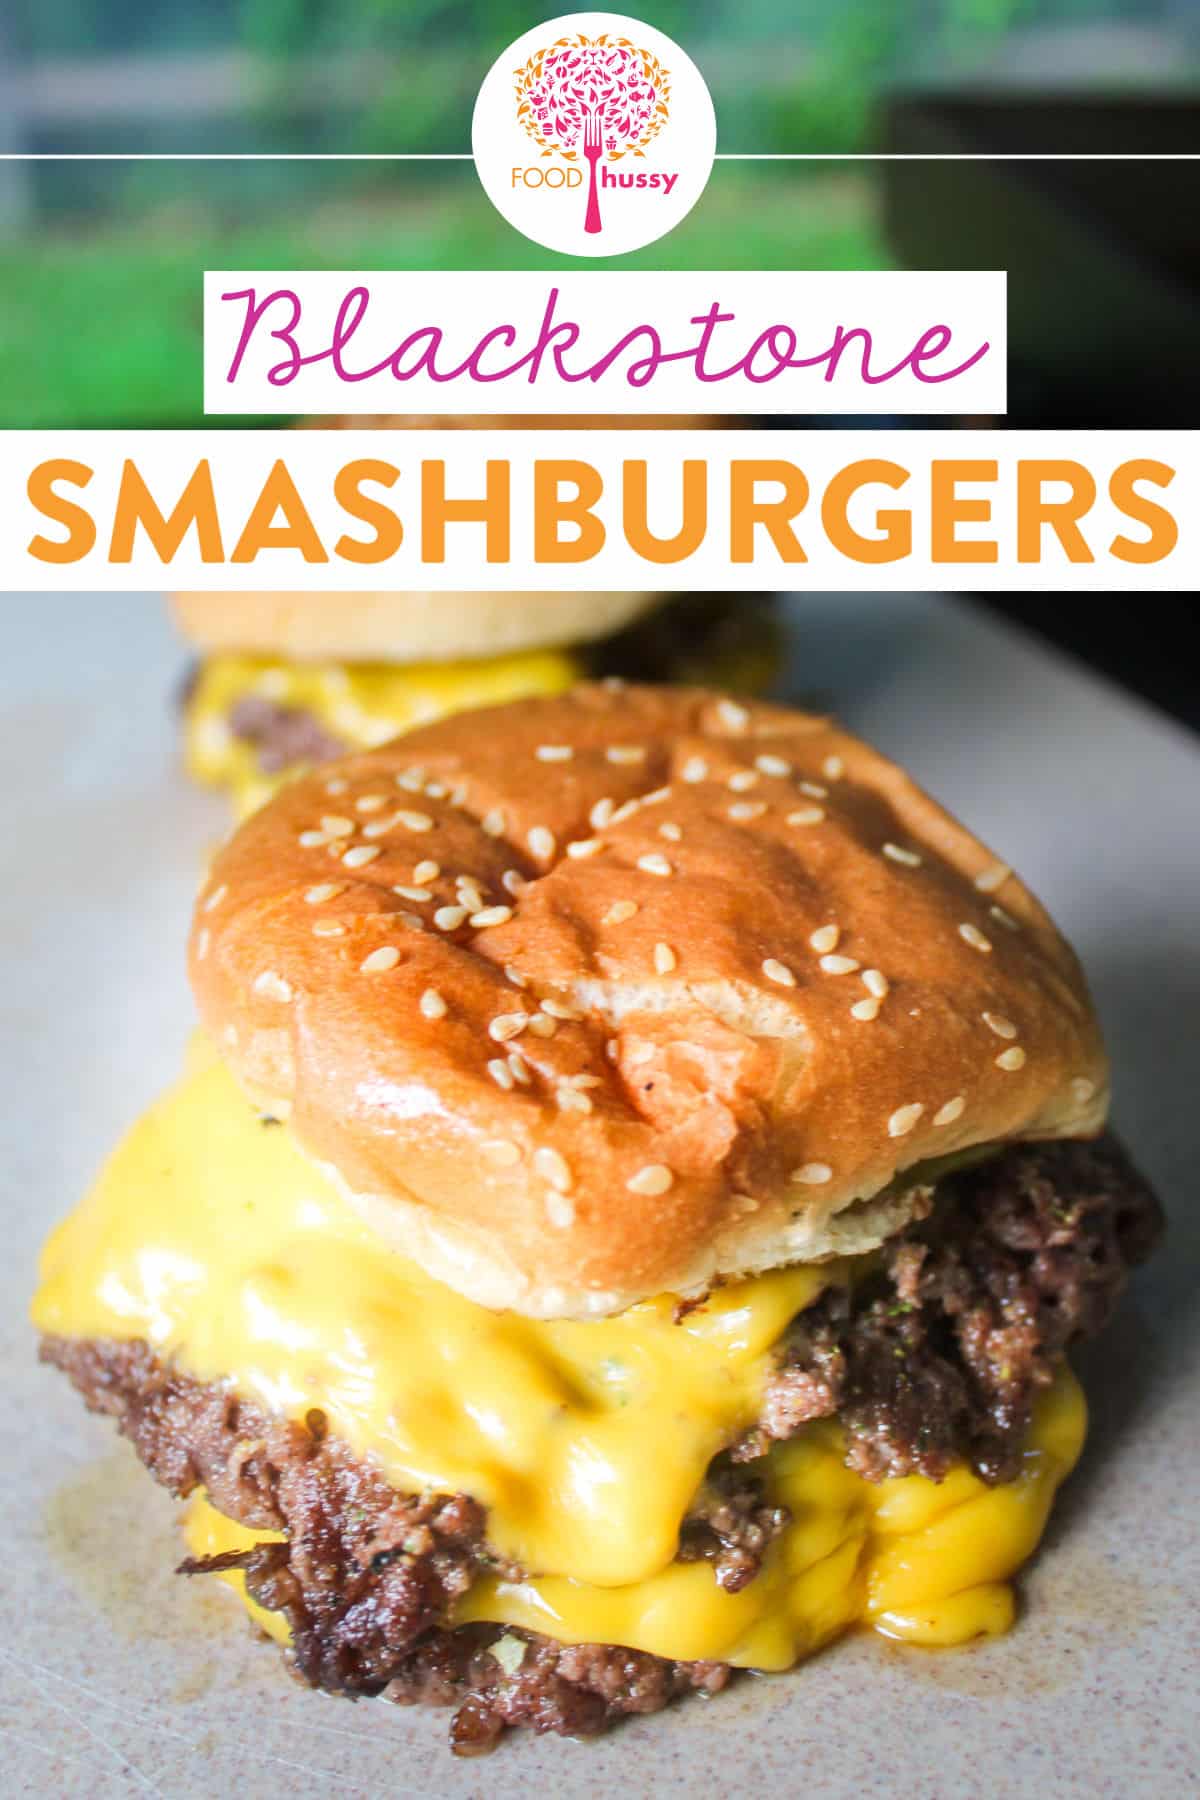 Blackstone Smash Burgers are just as good as they look! Full of flavor, these burgers have crispy edges and are super cheesy! Plus - they cook in five minutes! If you're looking for a fun, family-friendly quick dinner - making Smash Burgers on the griddle are the way to go!  via @foodhussy